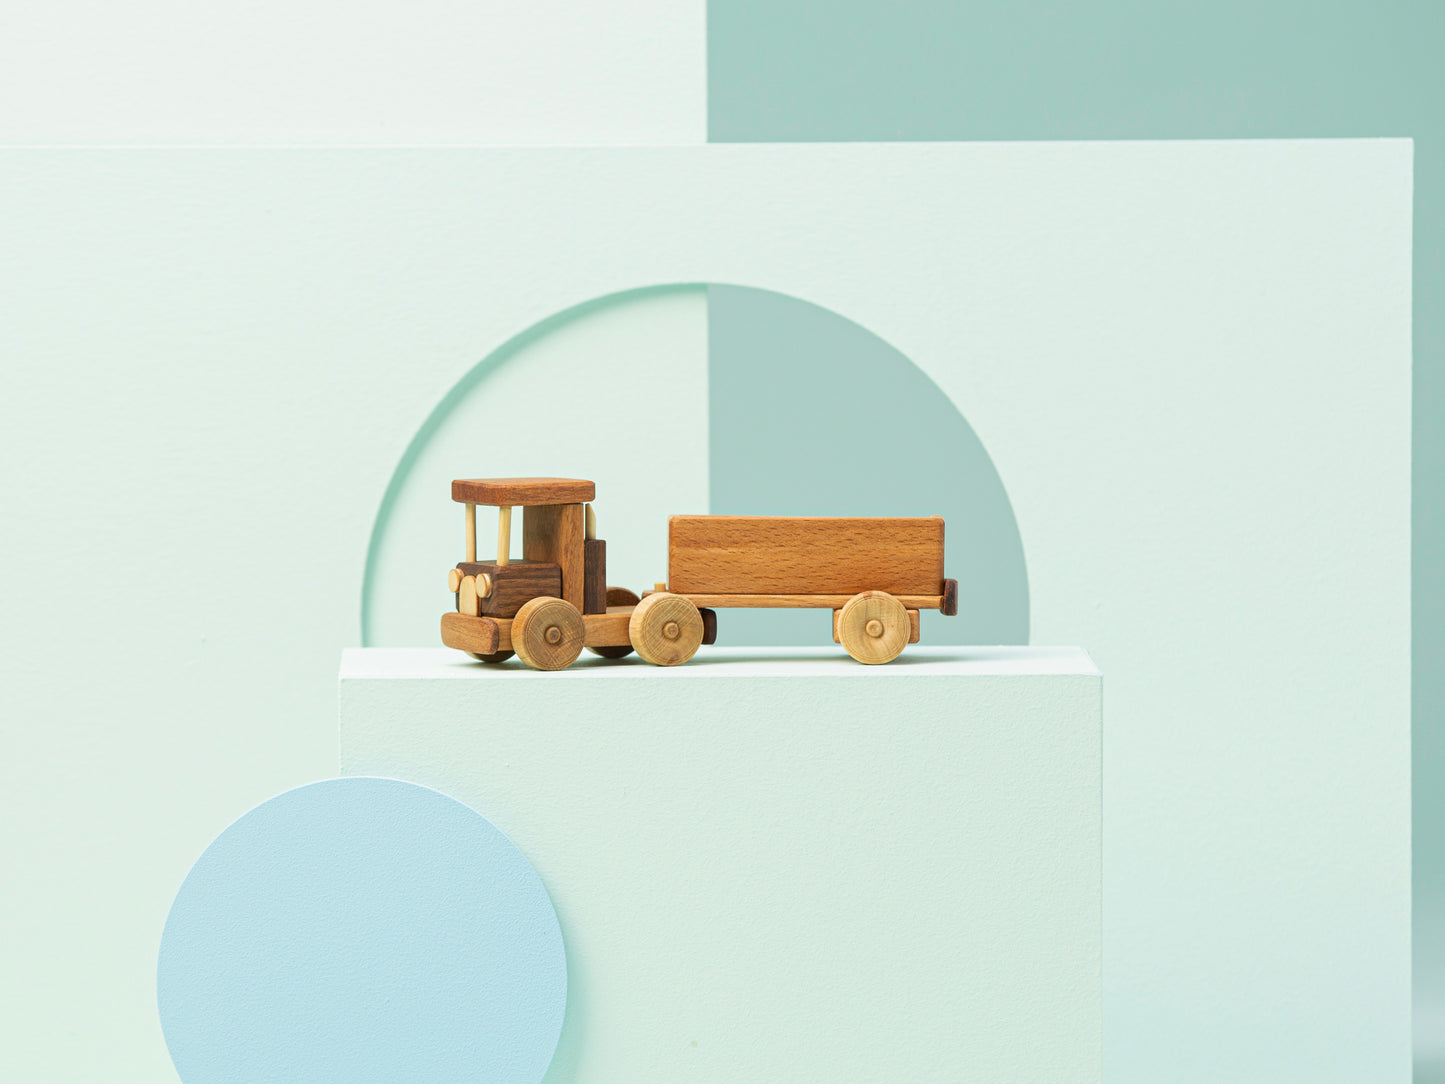 Flatbed Truck Wooden Toy